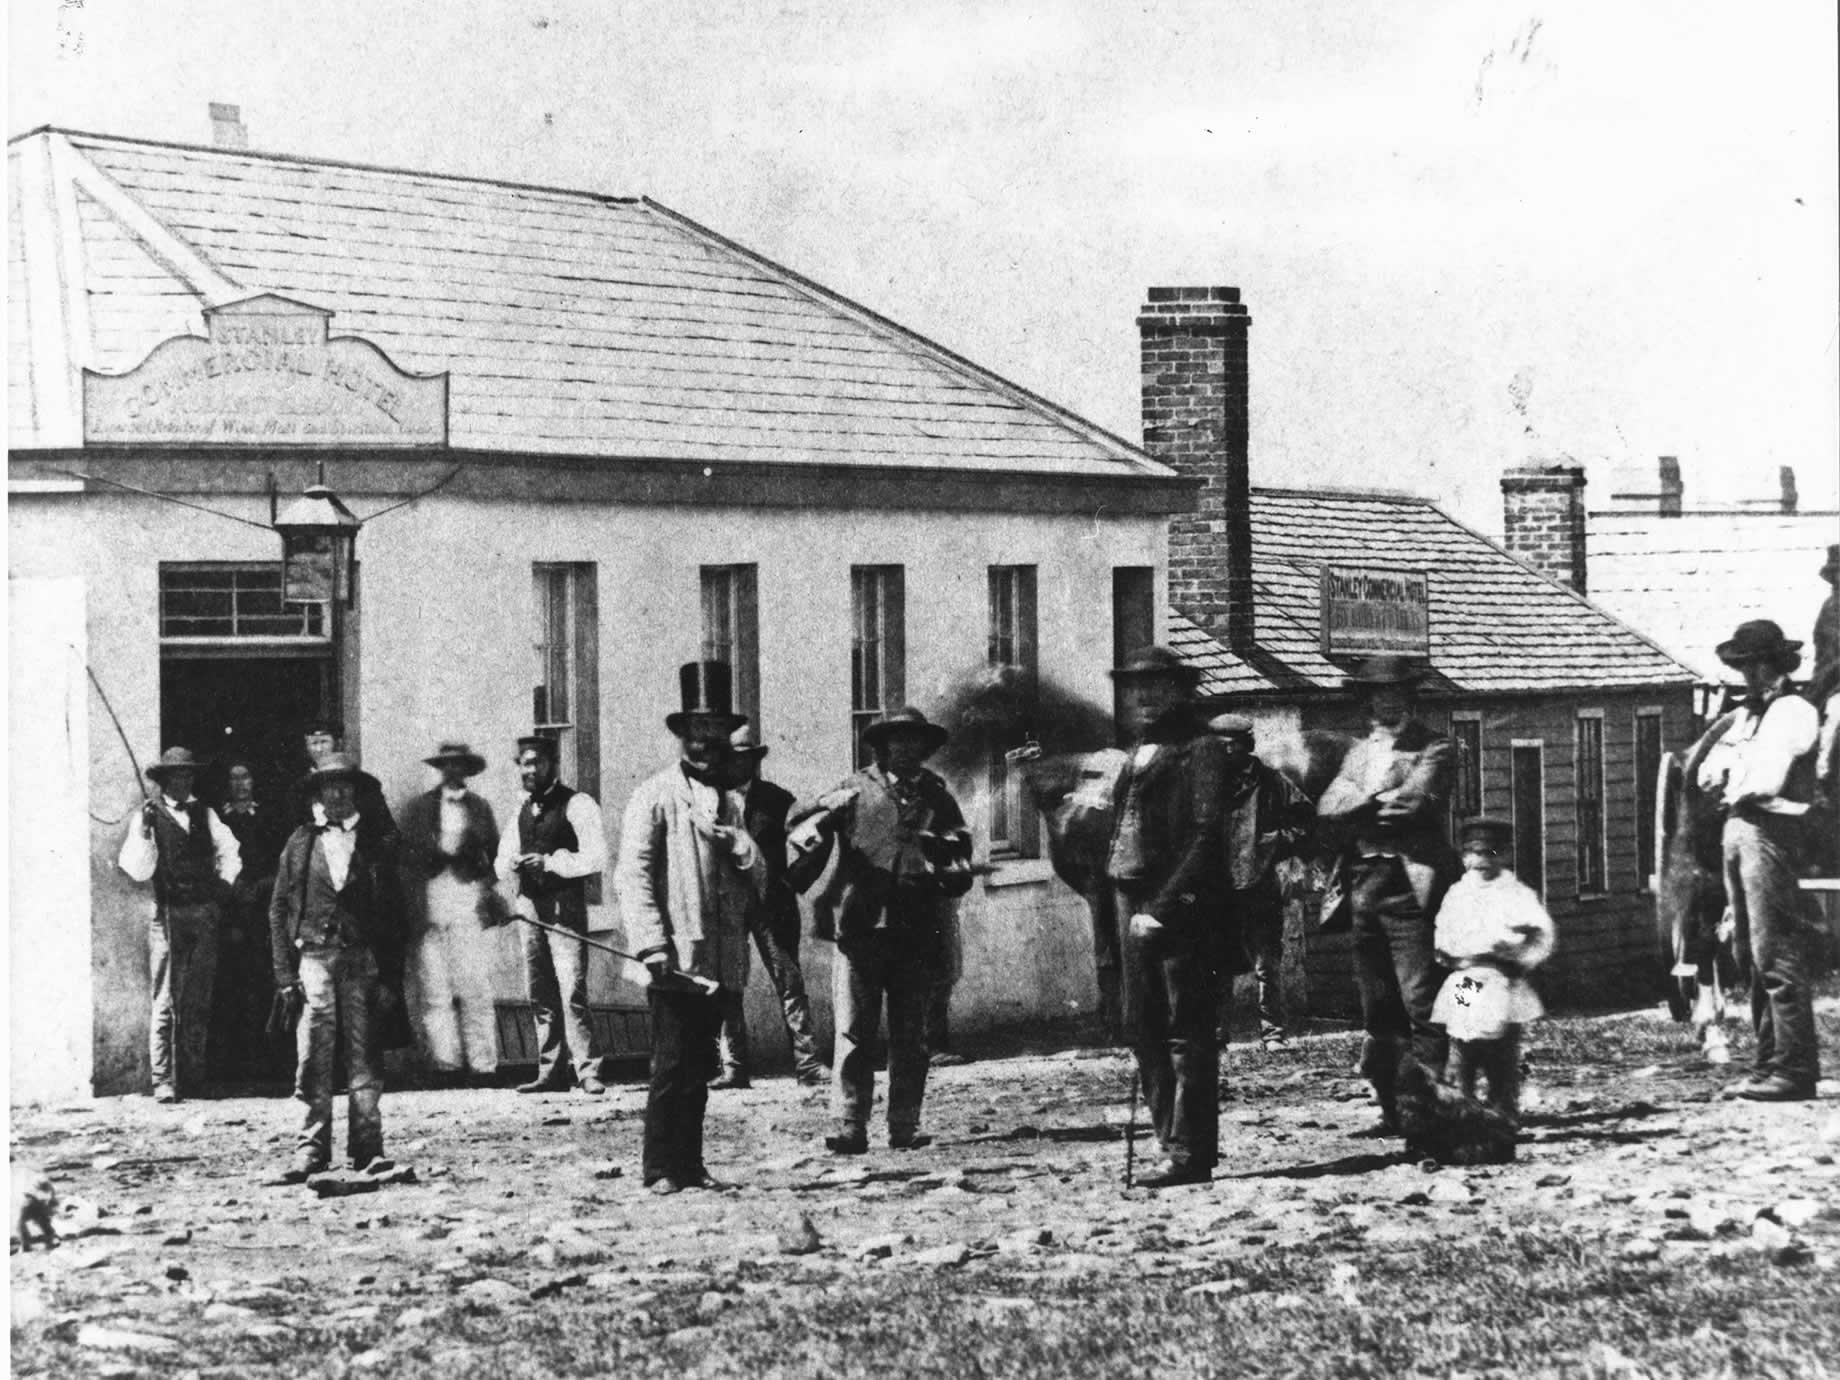 VDL Company tenants gathered outside the Commercial Hotel, 1858